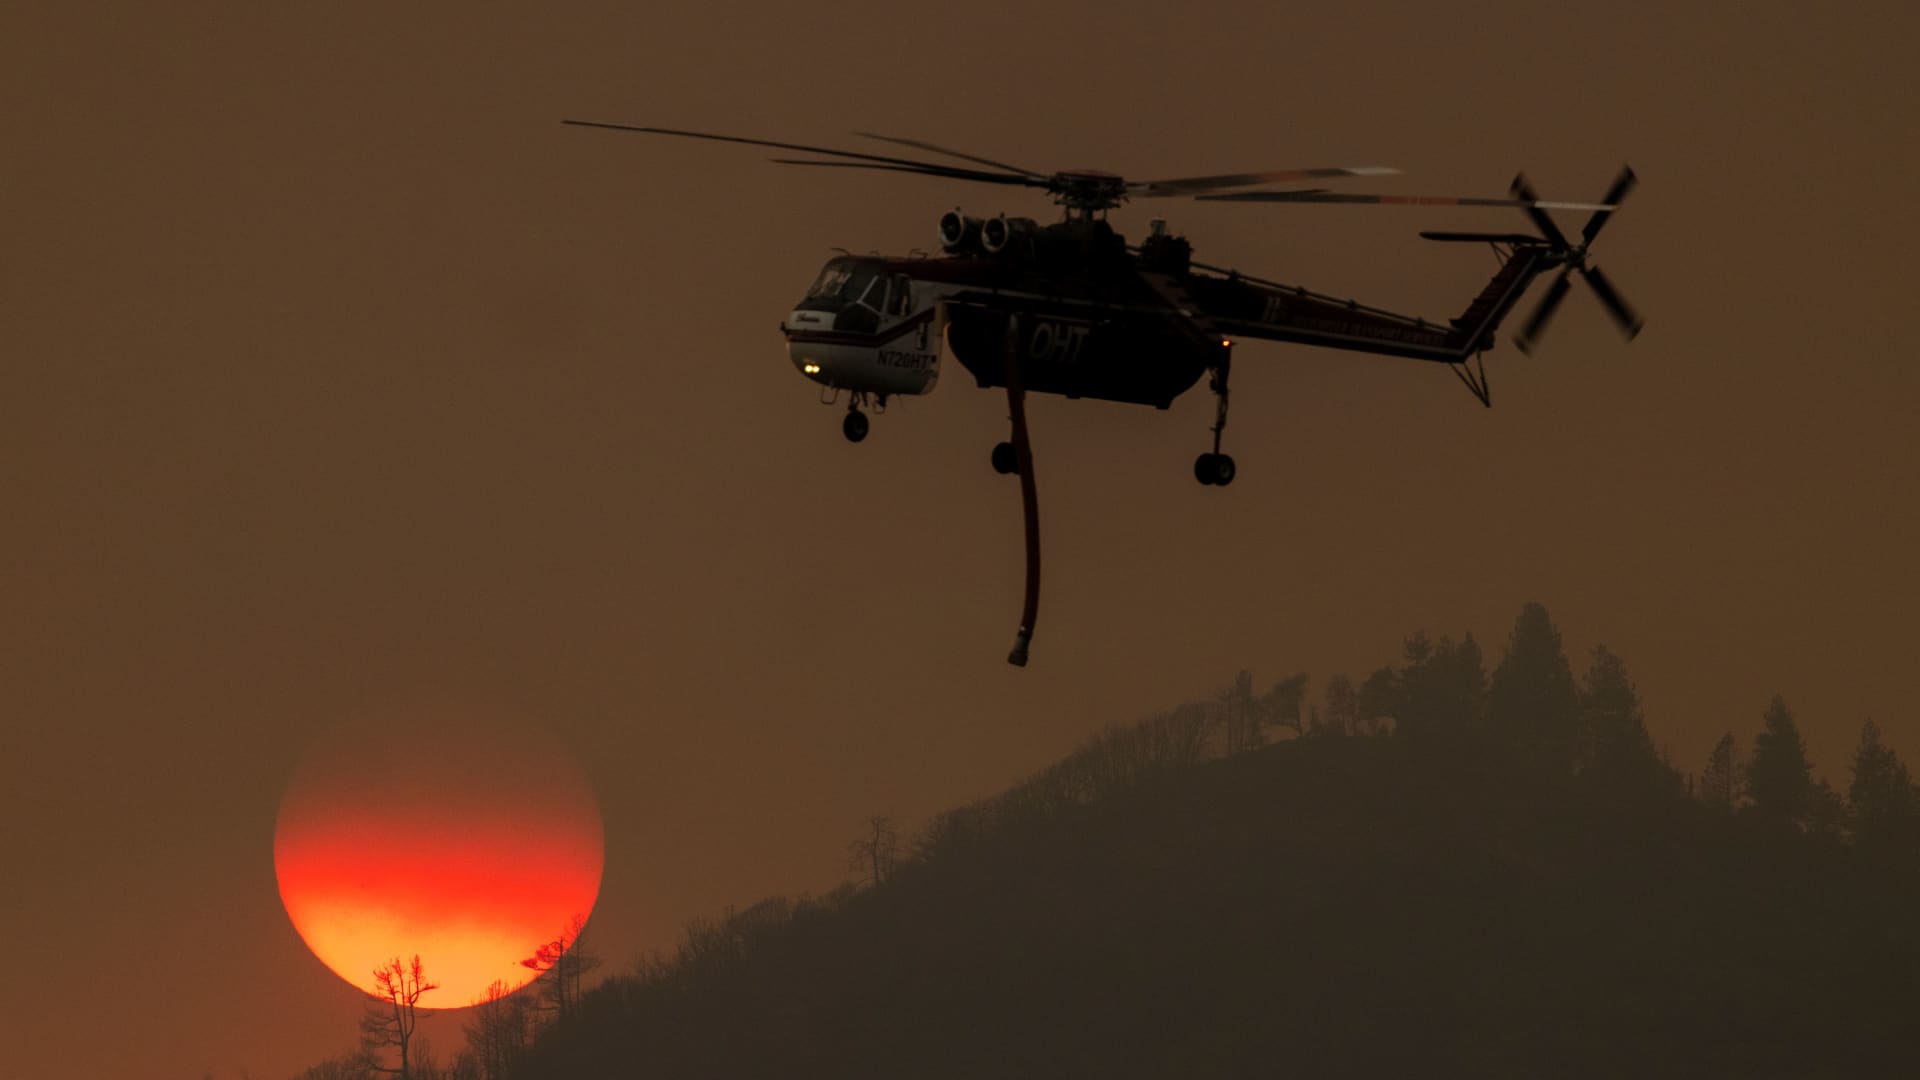 A firefighting helicopter passes the setting sun while fighting the Oak Fire near Mariposa, California, on July 24, 2022.